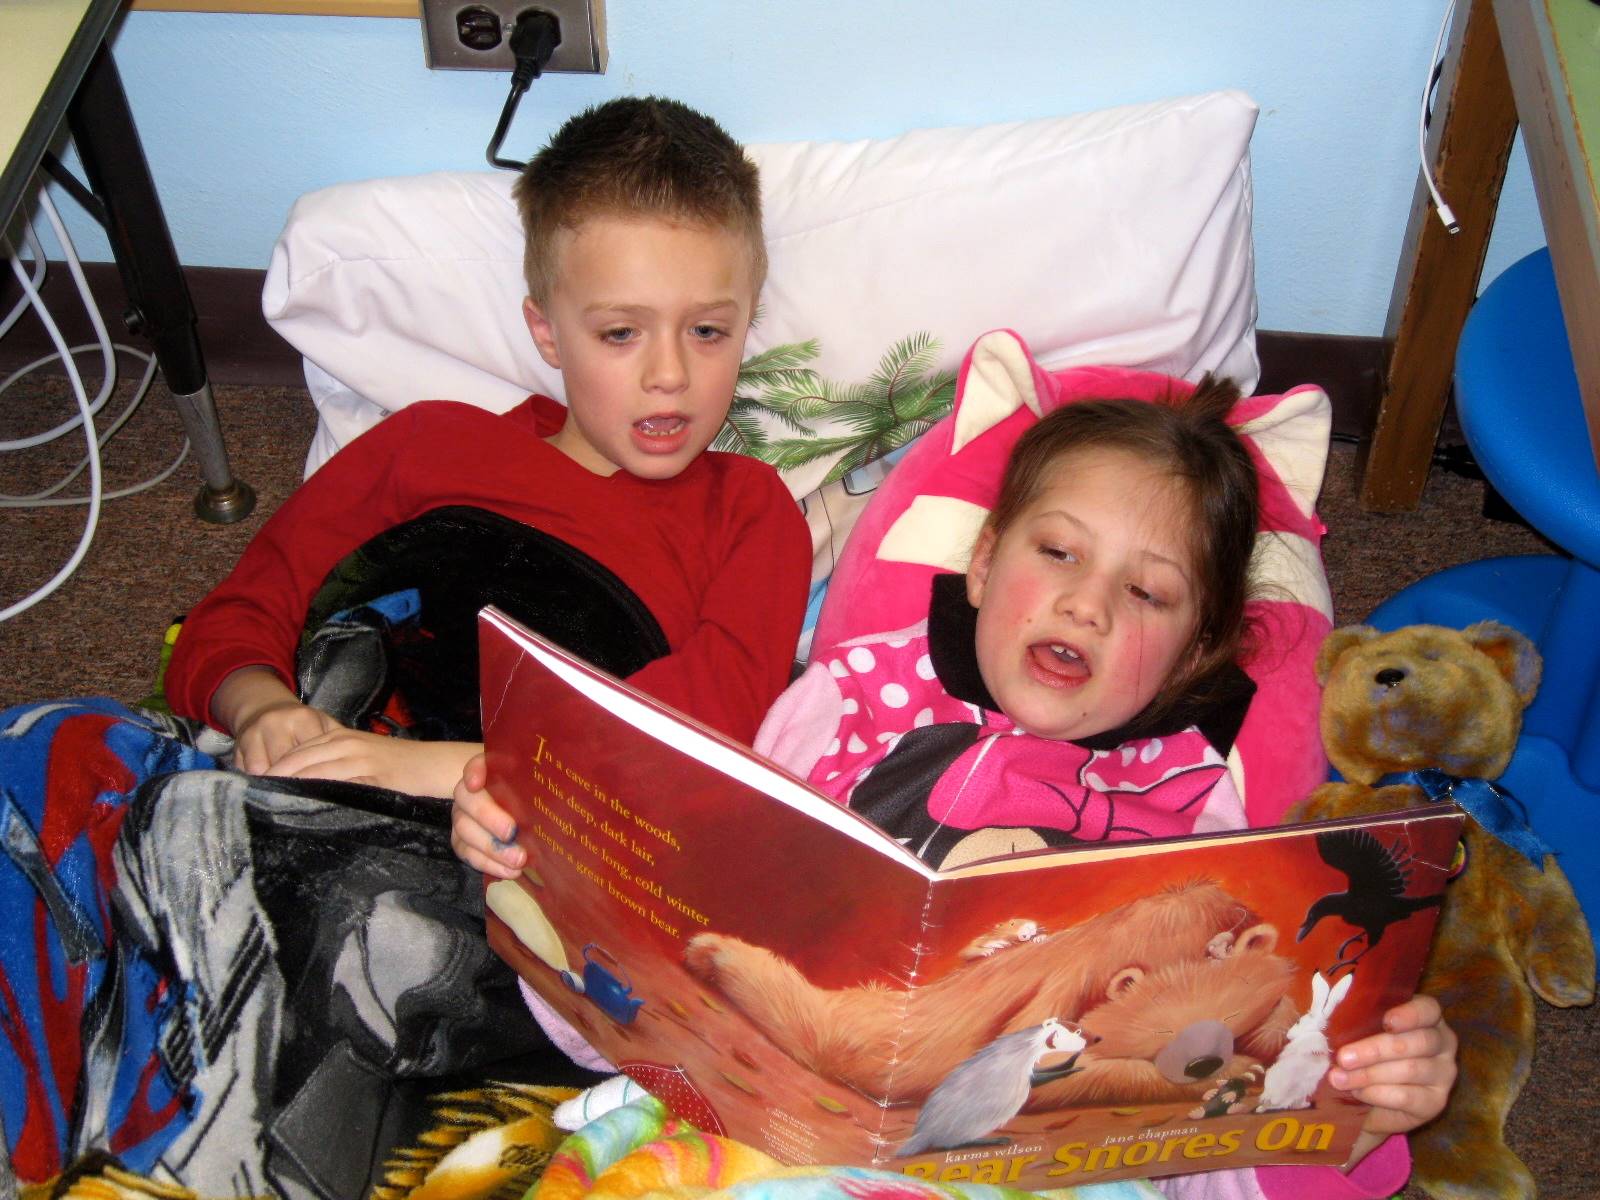 2 students read together.